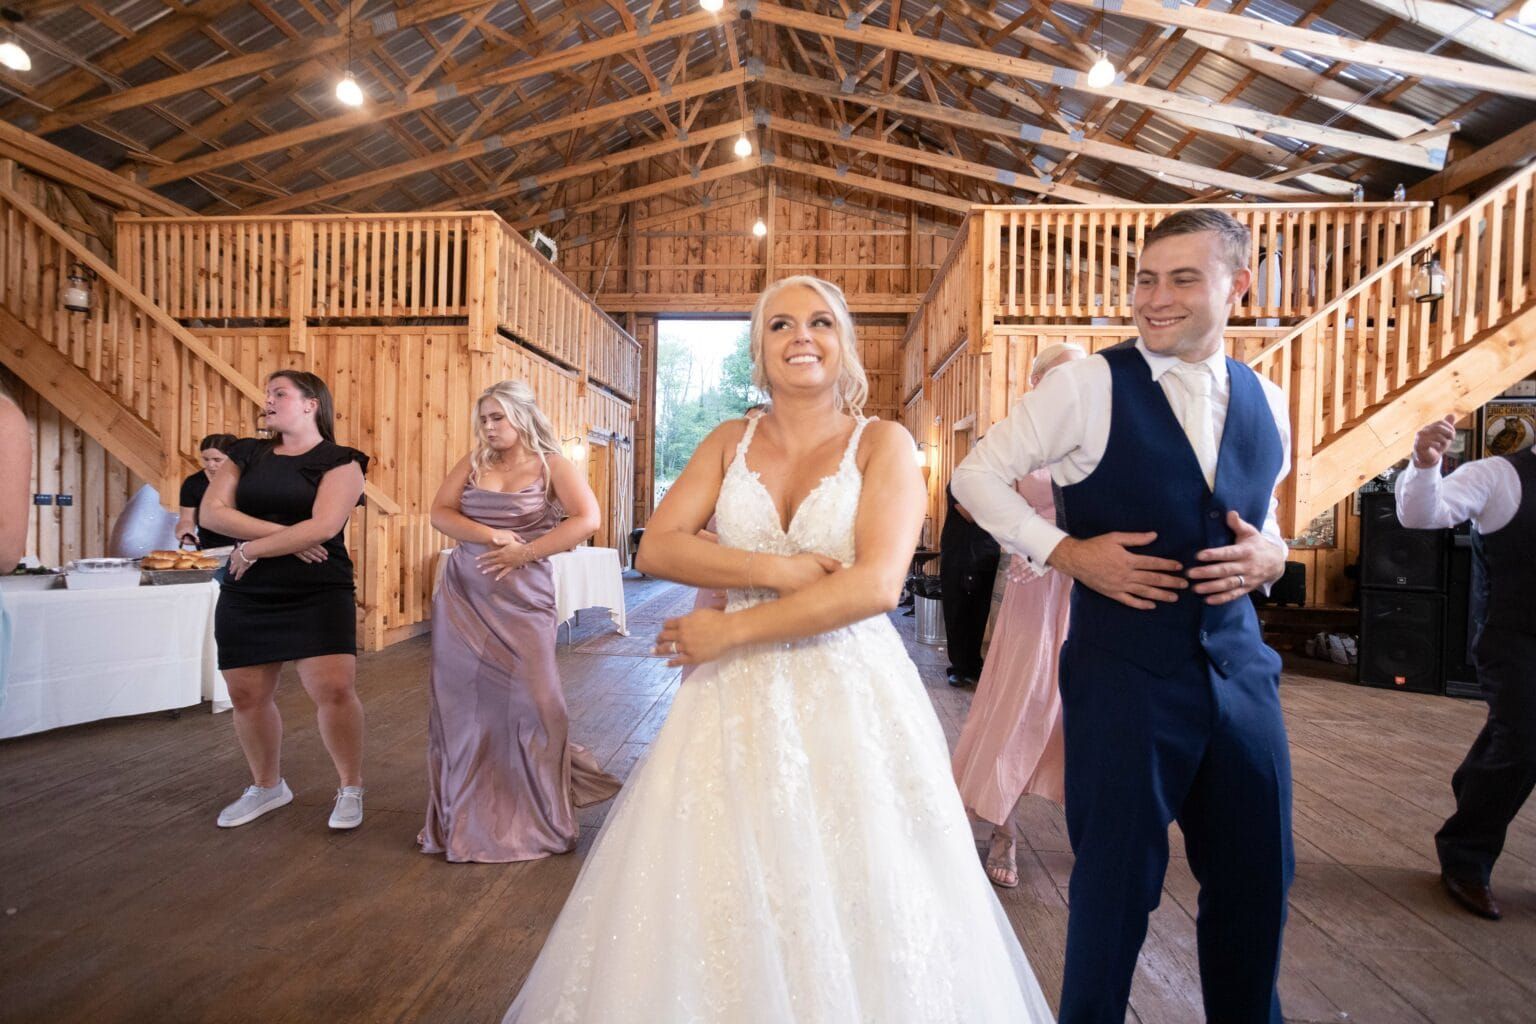 A bride and groom are dancing with their wedding party in a barn.